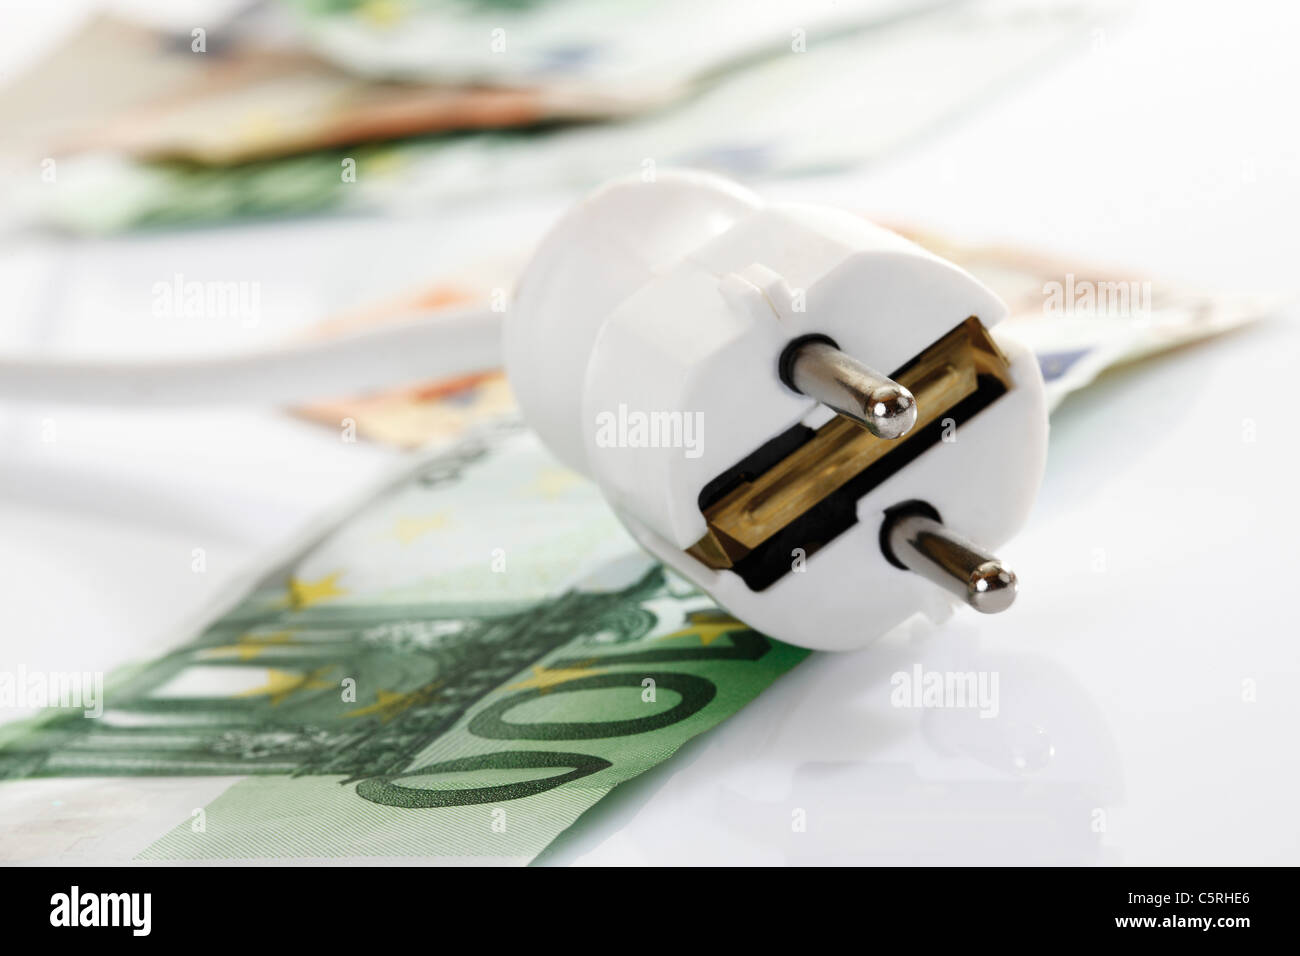 White  plug and banknotes, close-up Stock Photo